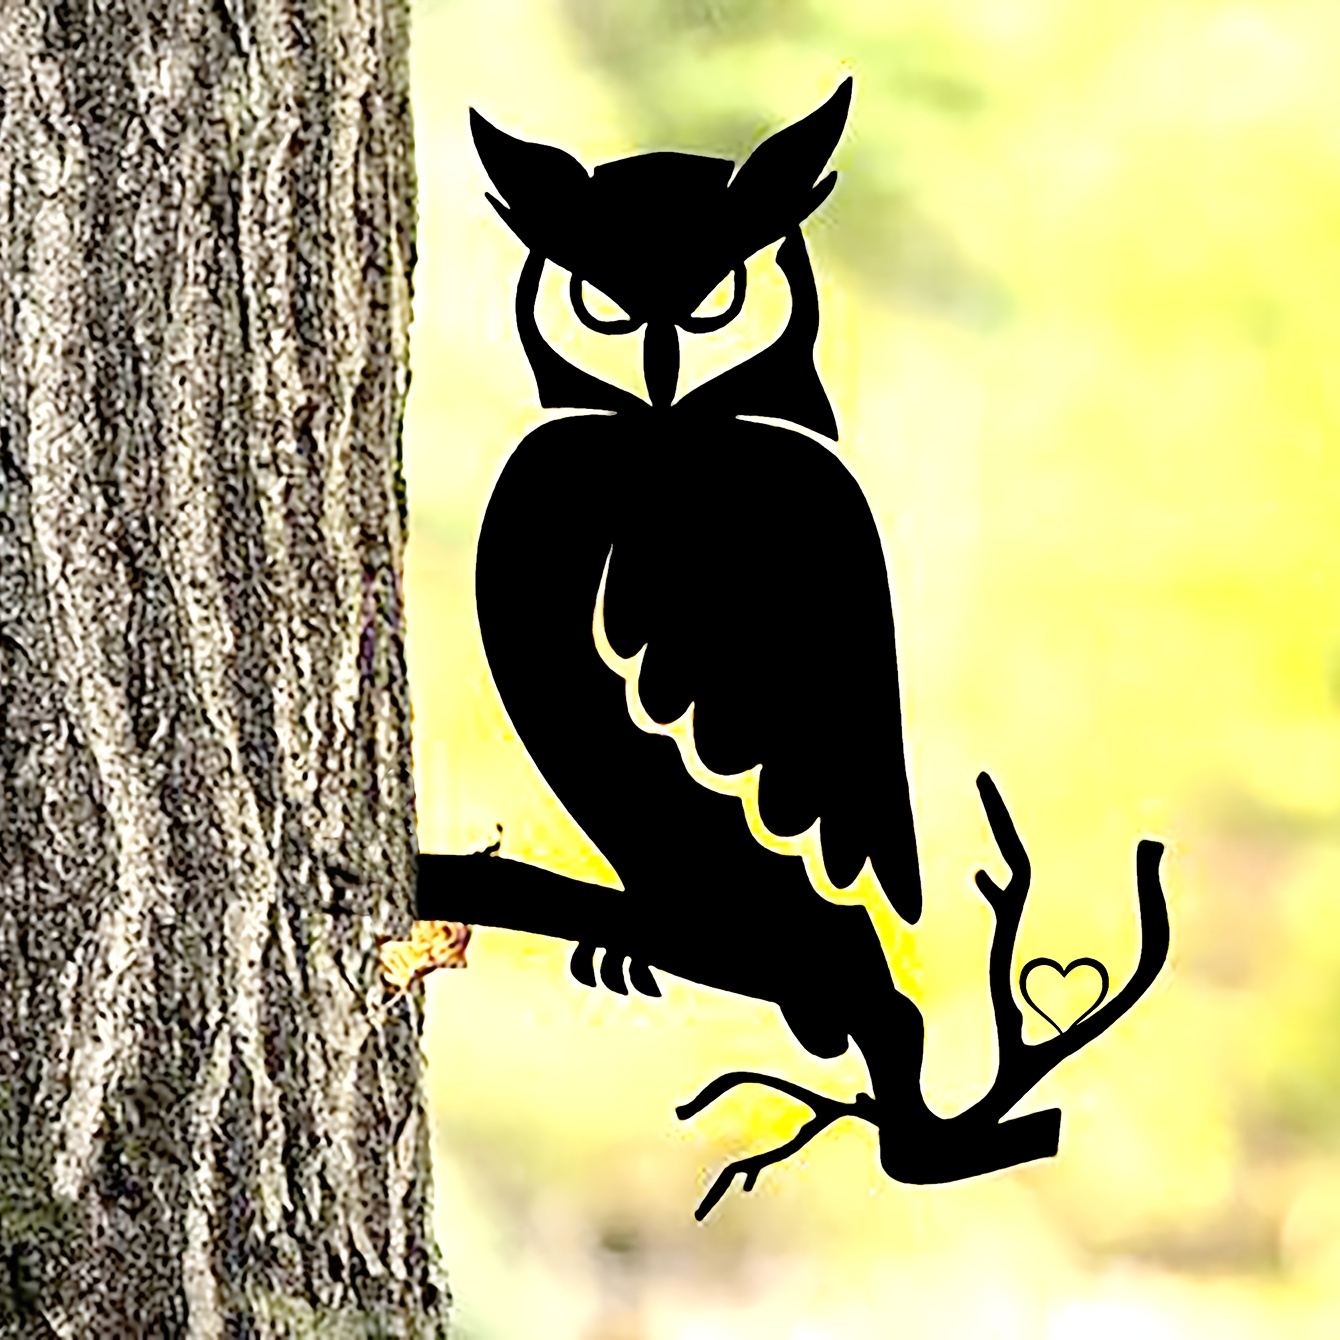 owl on a branch silhouette